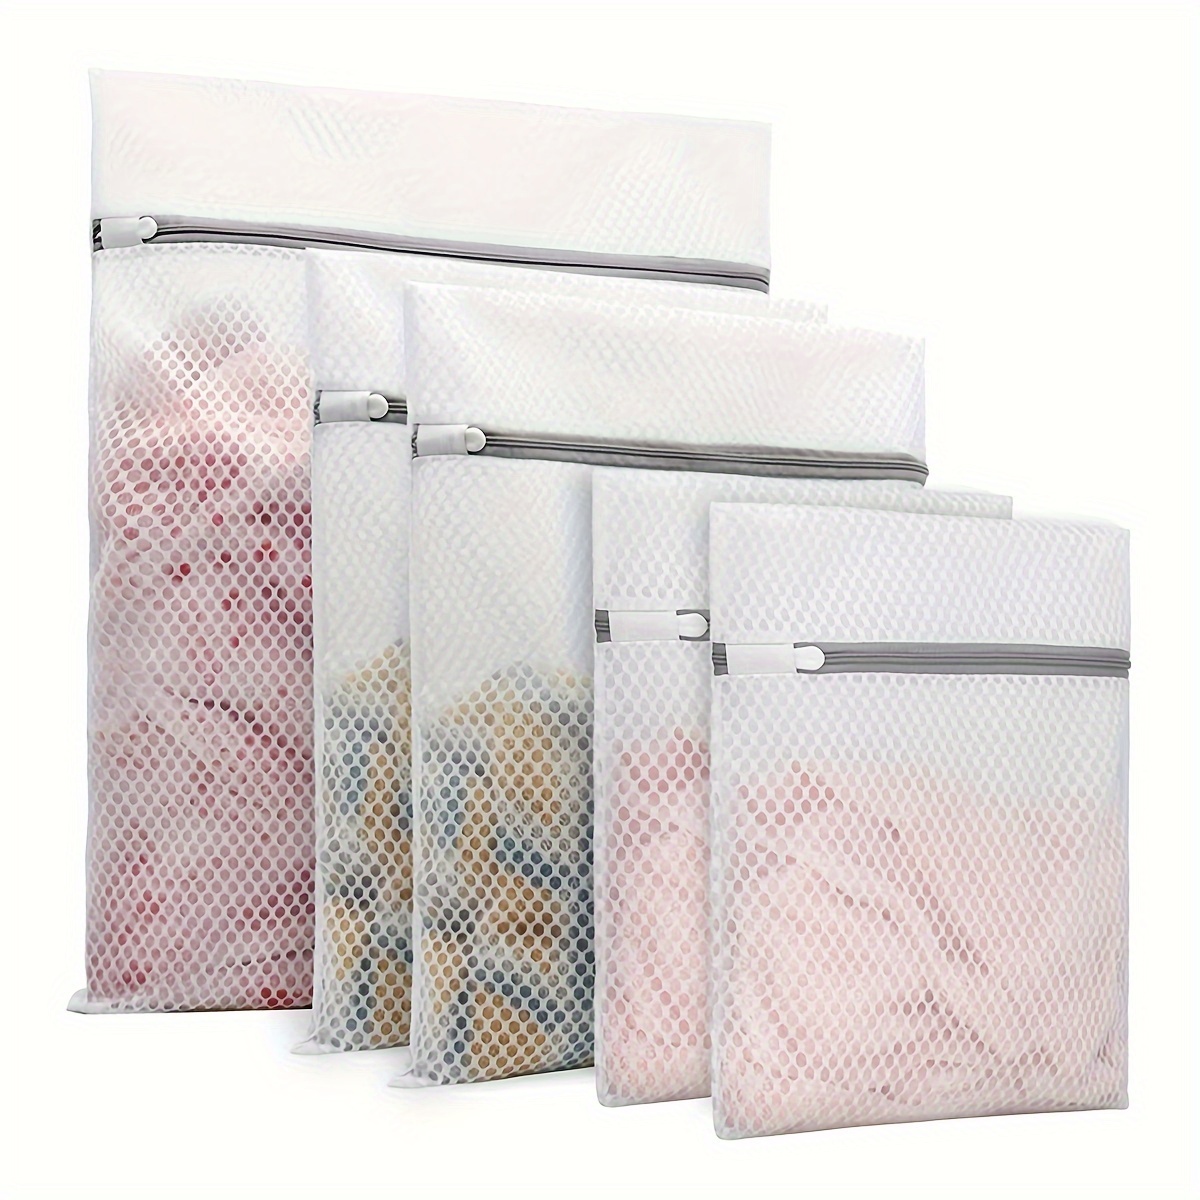 Laundry Bags Mesh Wash Bags, Lingerie Bags For Washing Delicates